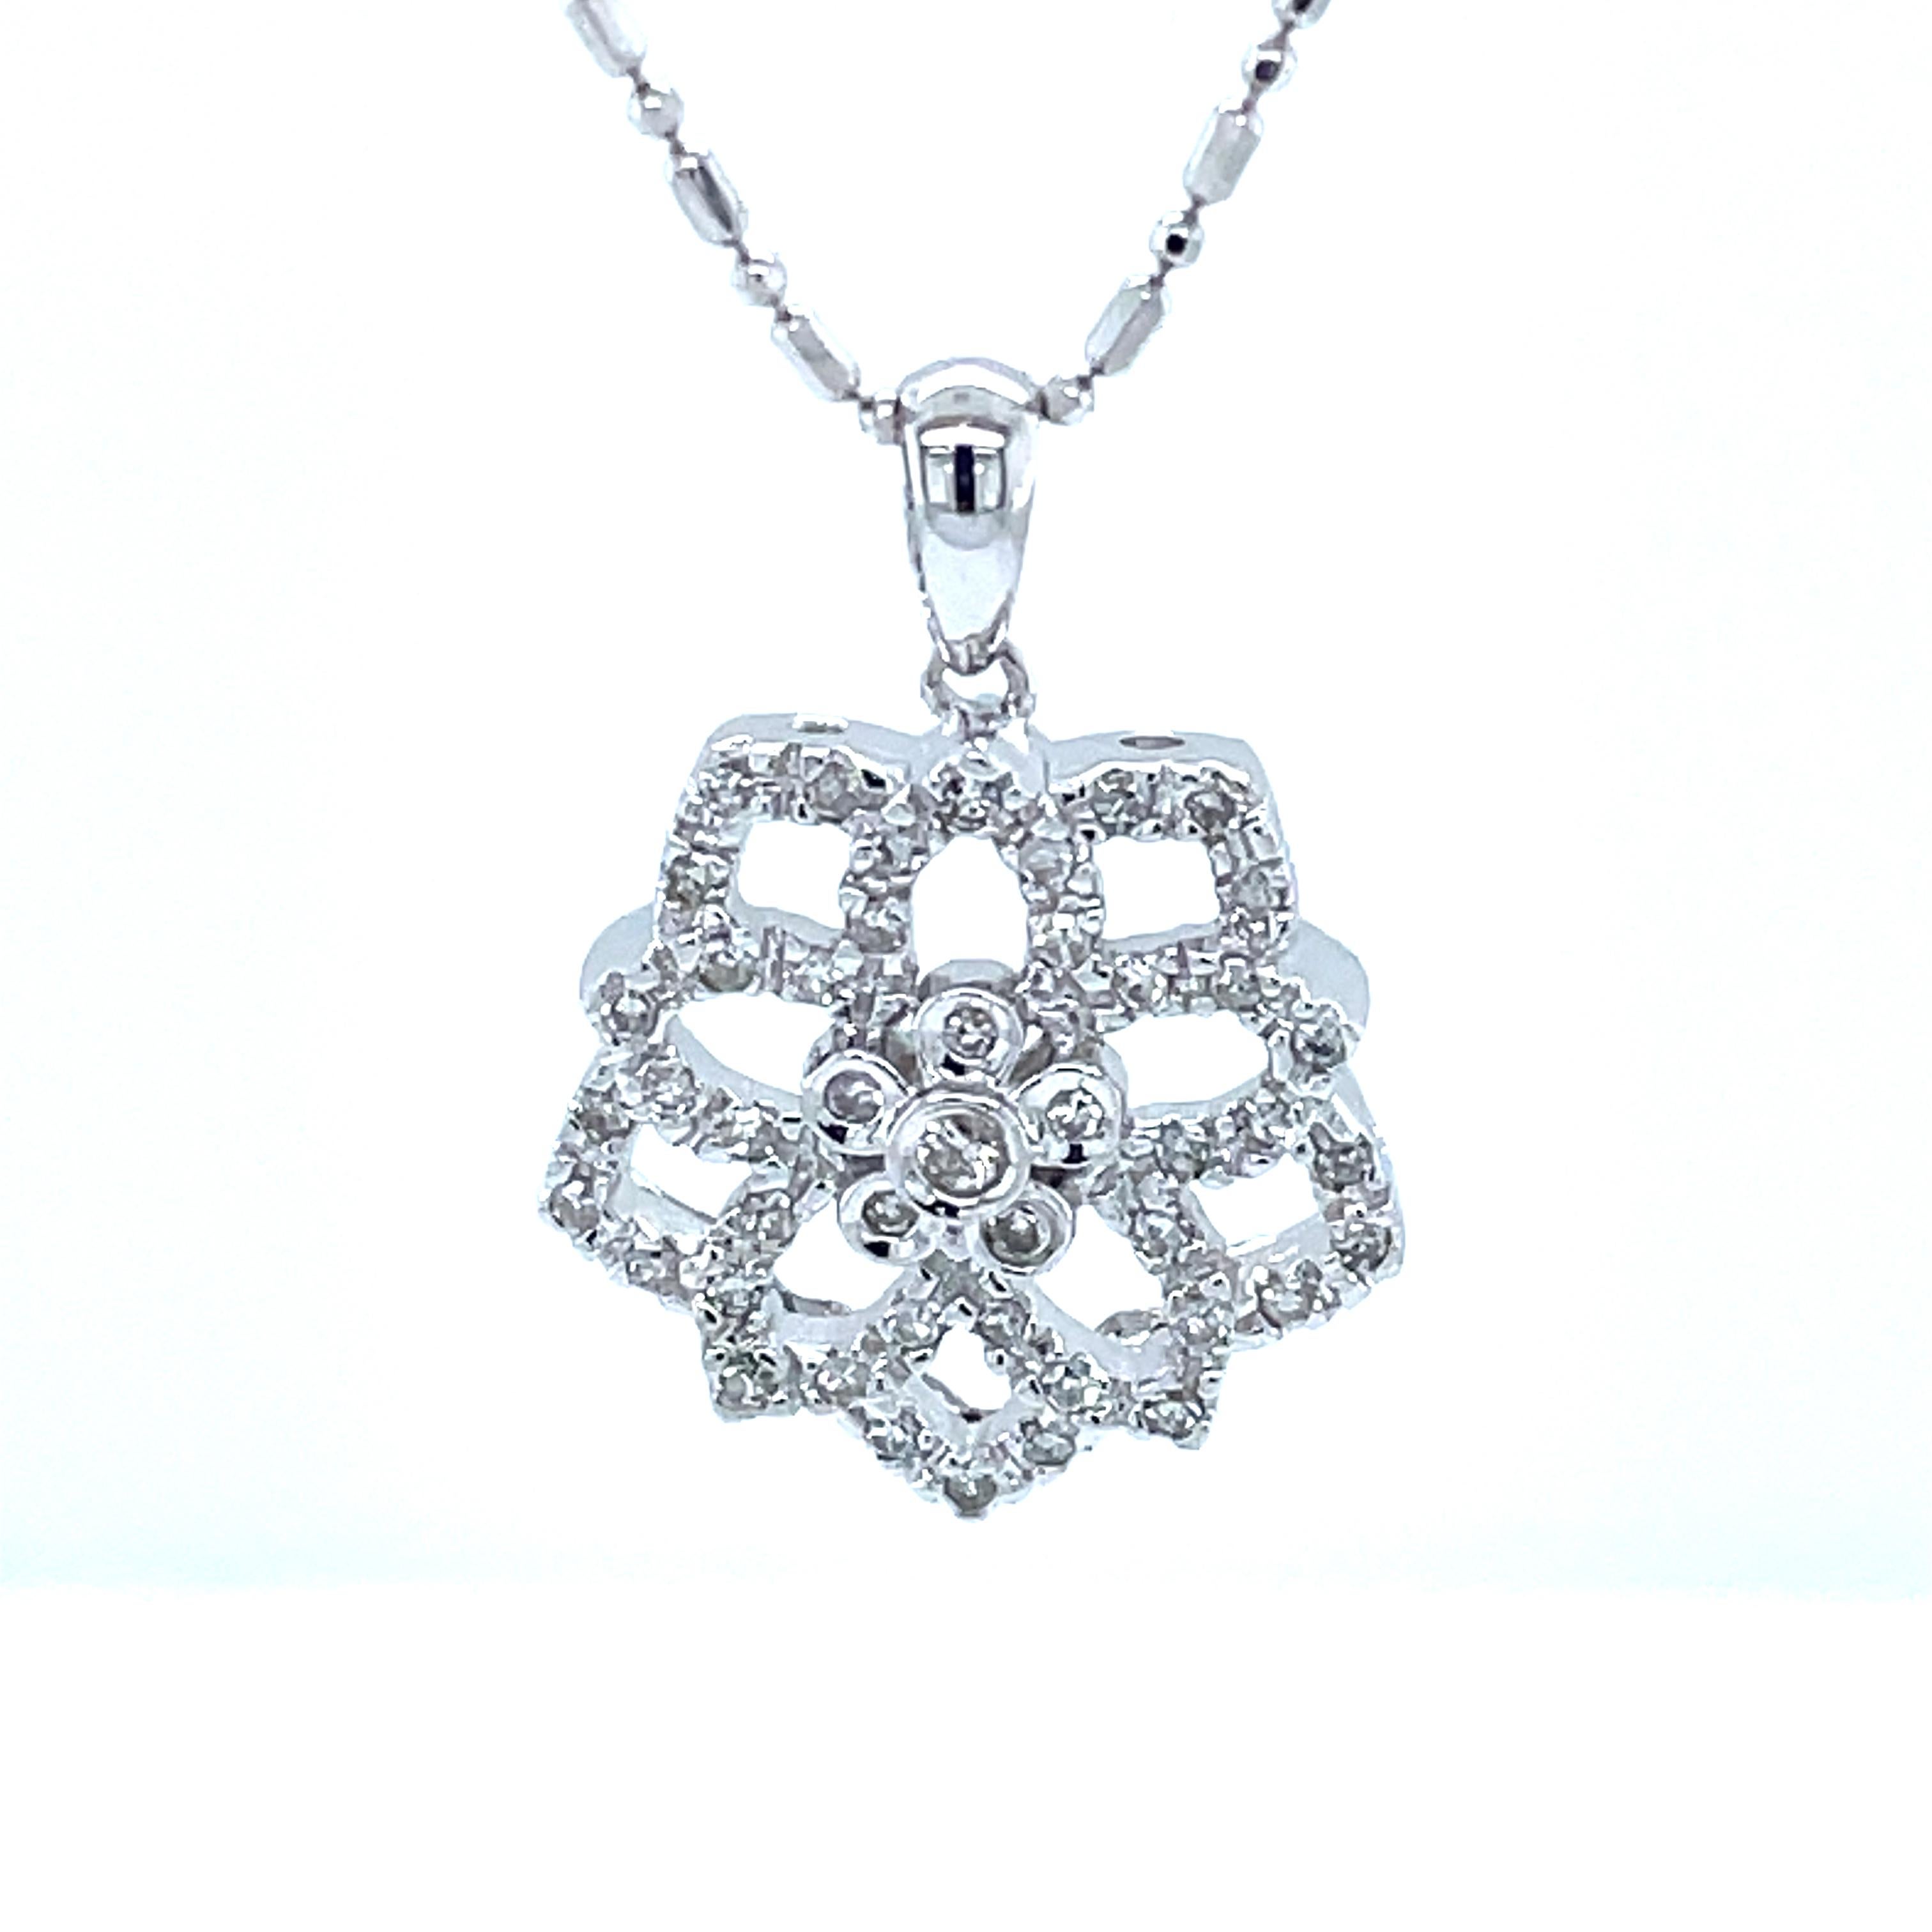 Floral Inspired 14 Karat White Gold Diamond Pendant Necklace In New Condition For Sale In Mount Kisco, NY